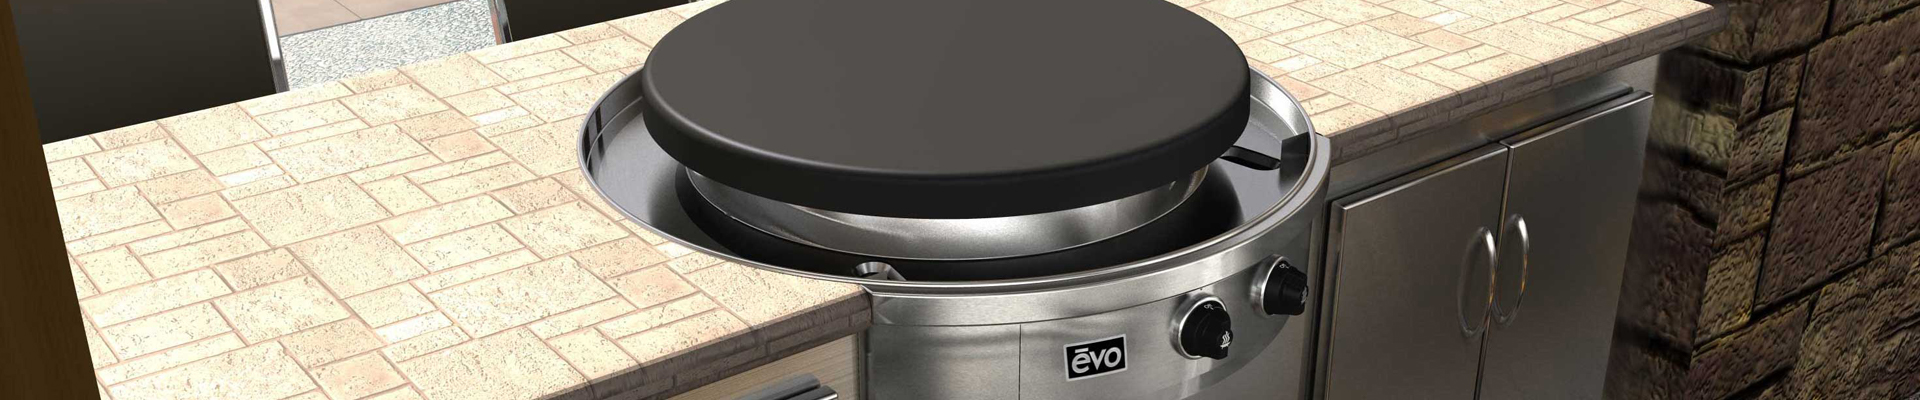 Evo America Flat-top Barbecue Grills at Premier BBQ & Fire of Southern Nevada